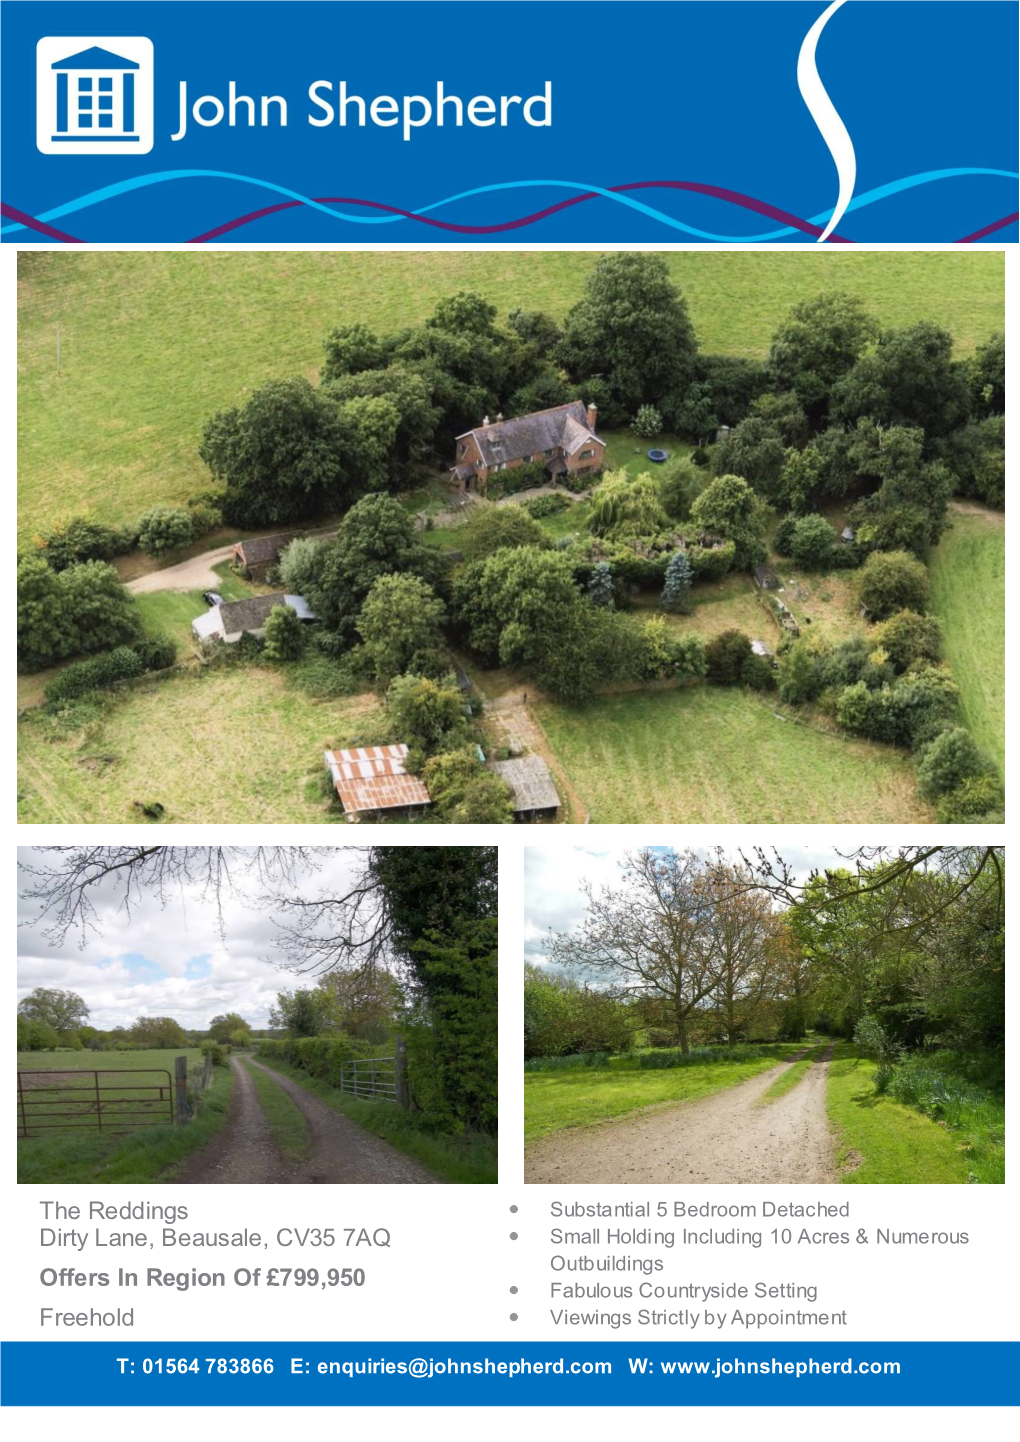 The Reddings Dirty Lane, Beausale, CV35 7AQ Offers in Region of £799,950 Freehold